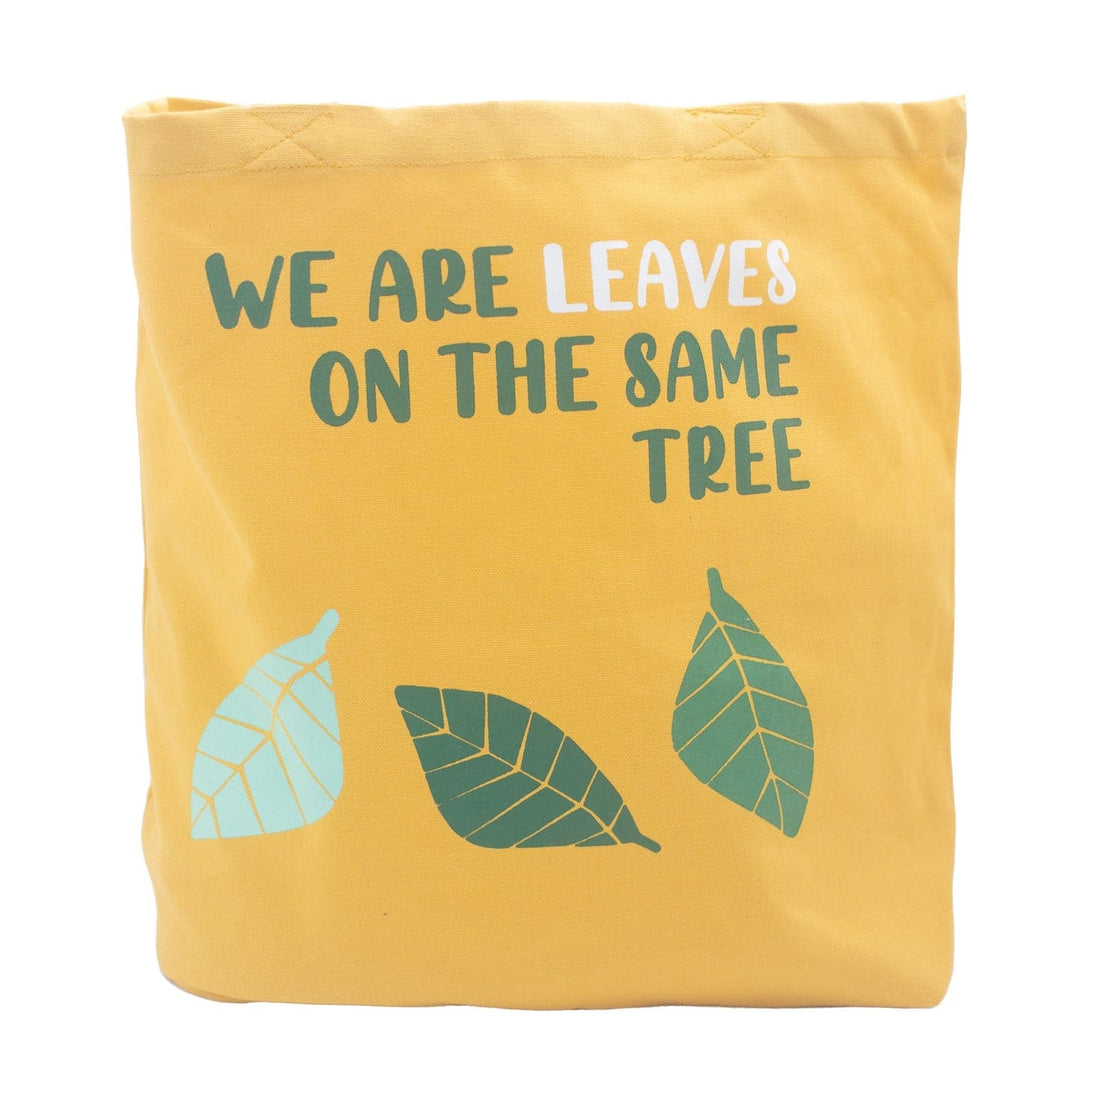 Printed Cotton Bag - We are Leaves - Yellow - best price from Maltashopper.com PCB-02A